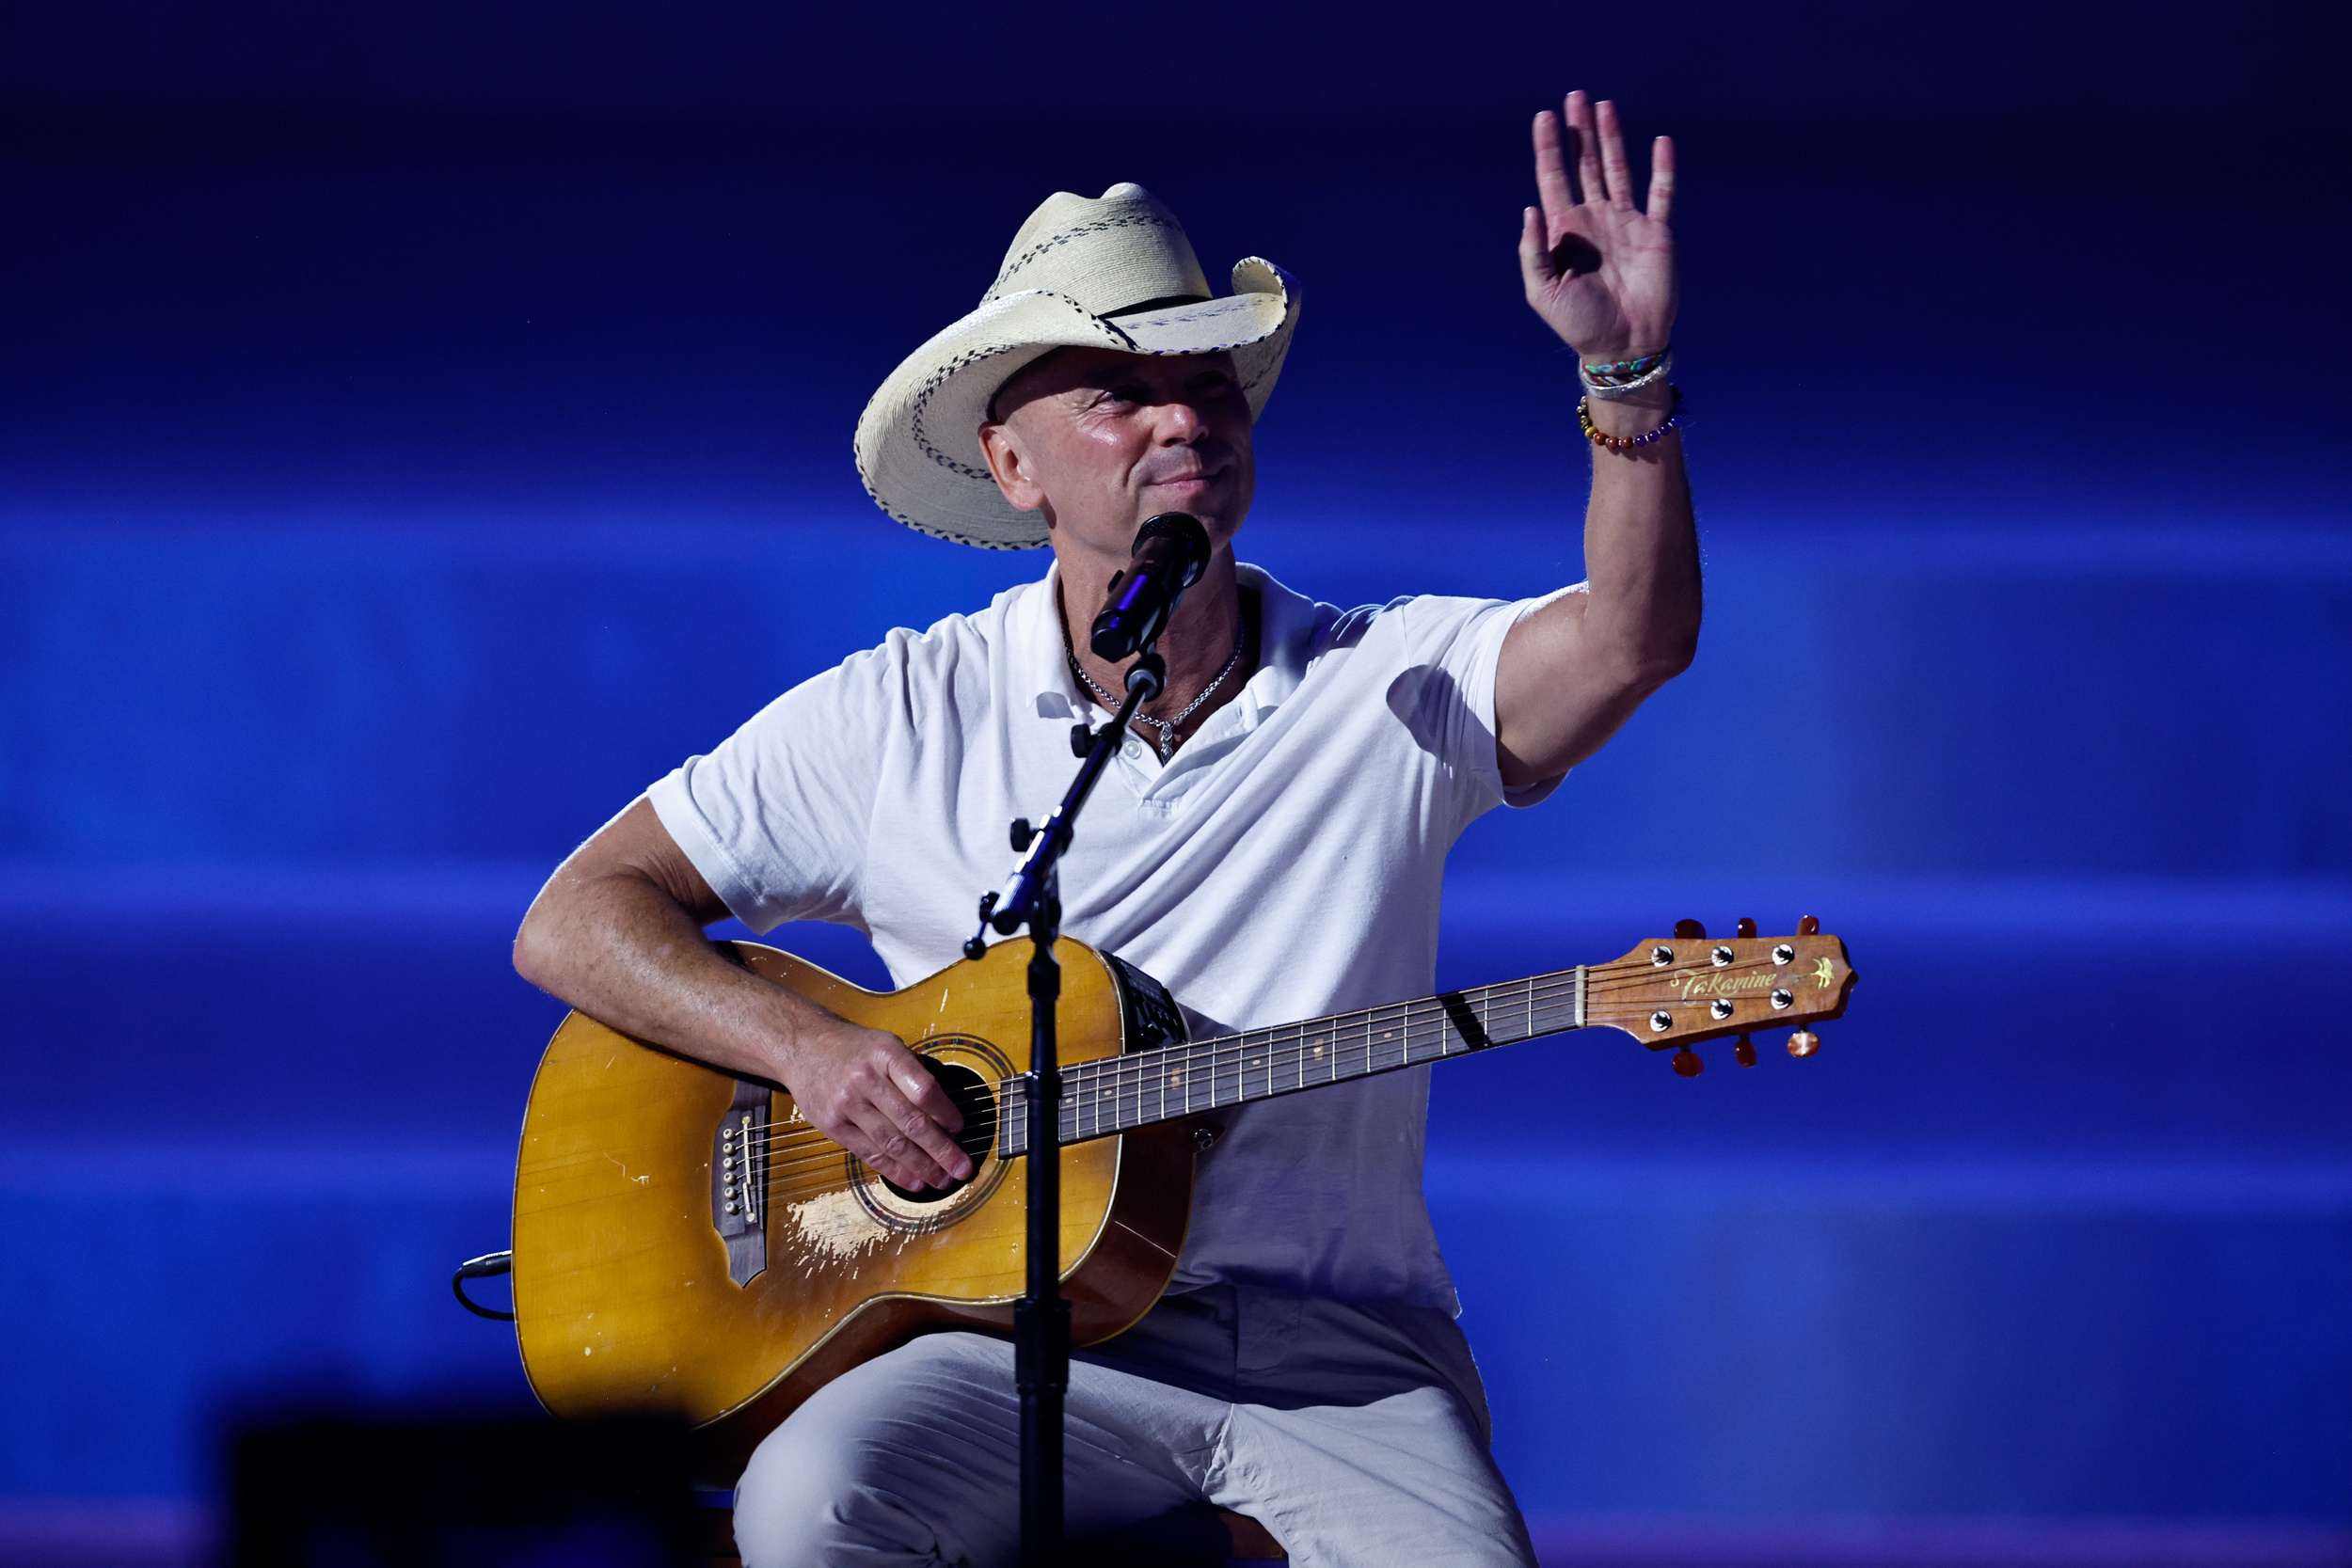 <p>When it comes to hosting a summer musical party, Chesney is a great host. That's why there's likely plenty of fun to be had when Chesney takes the stage this year for a monster stadium tour. <a href="https://www.kennychesney.com/tour">More than 20 stops</a> are scheduled, hitting some of America's biggest venues, like the April 20 opener at Tampa's Raymond James Stadium, Chicago's Soldier Field, AT&T Stadium in suburban Dallas and SoFi Stadium in the greater Los Angeles proper. The Zac Brown Band will tag along for fun, making this a must-see concert event for country music fans.</p><p>You may also like: <a href='https://www.yardbarker.com/entertainment/articles/the_20_best_tv_shows_of_the_21st_century_so_far_022724/s1__39957263'>The 20 best TV shows of the 21st century, so far</a></p>